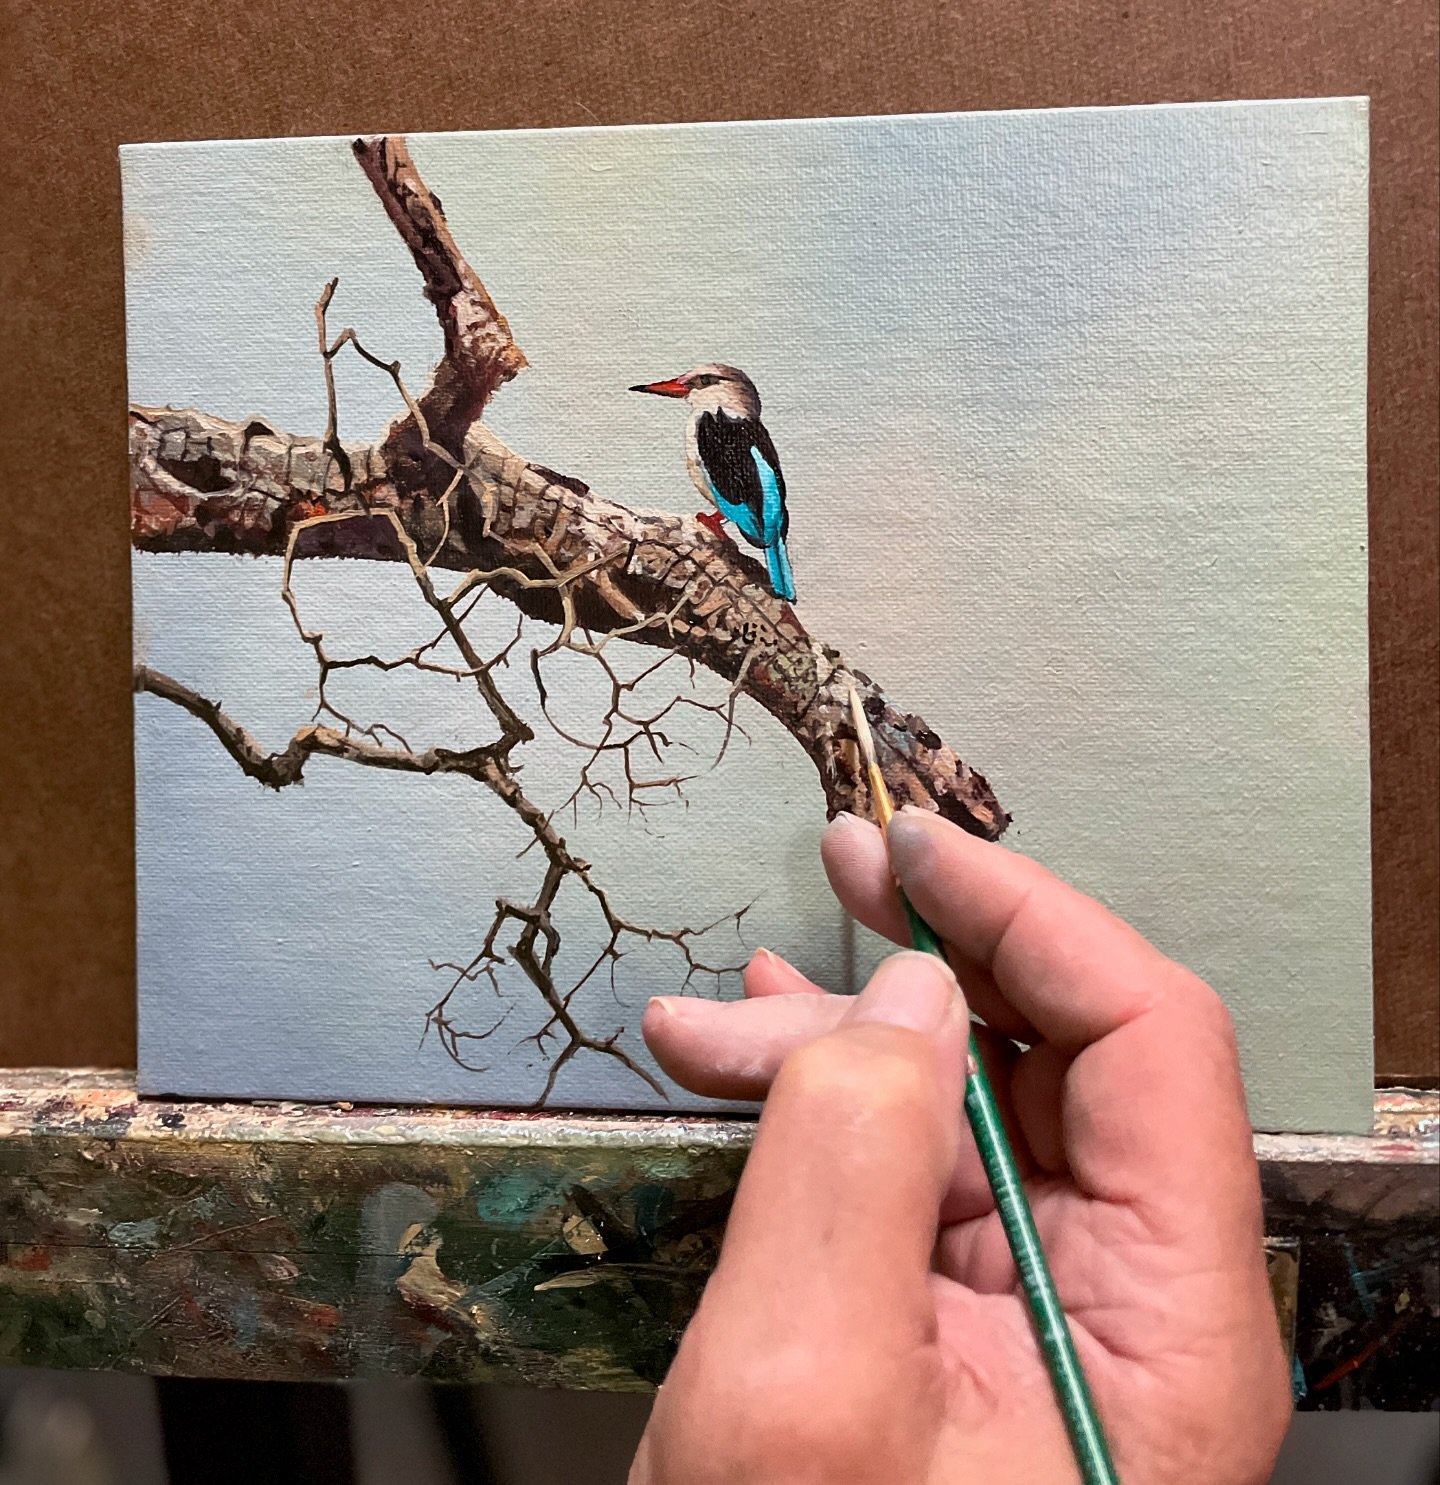 Woodlands kingfisher.  Mini on the easel today.  It has very bright blue feathers on its back, wing panels and tail, with black shoulders and a white belly, also distinguishable by its bright red mandible. They are delightful little birds found in Zi